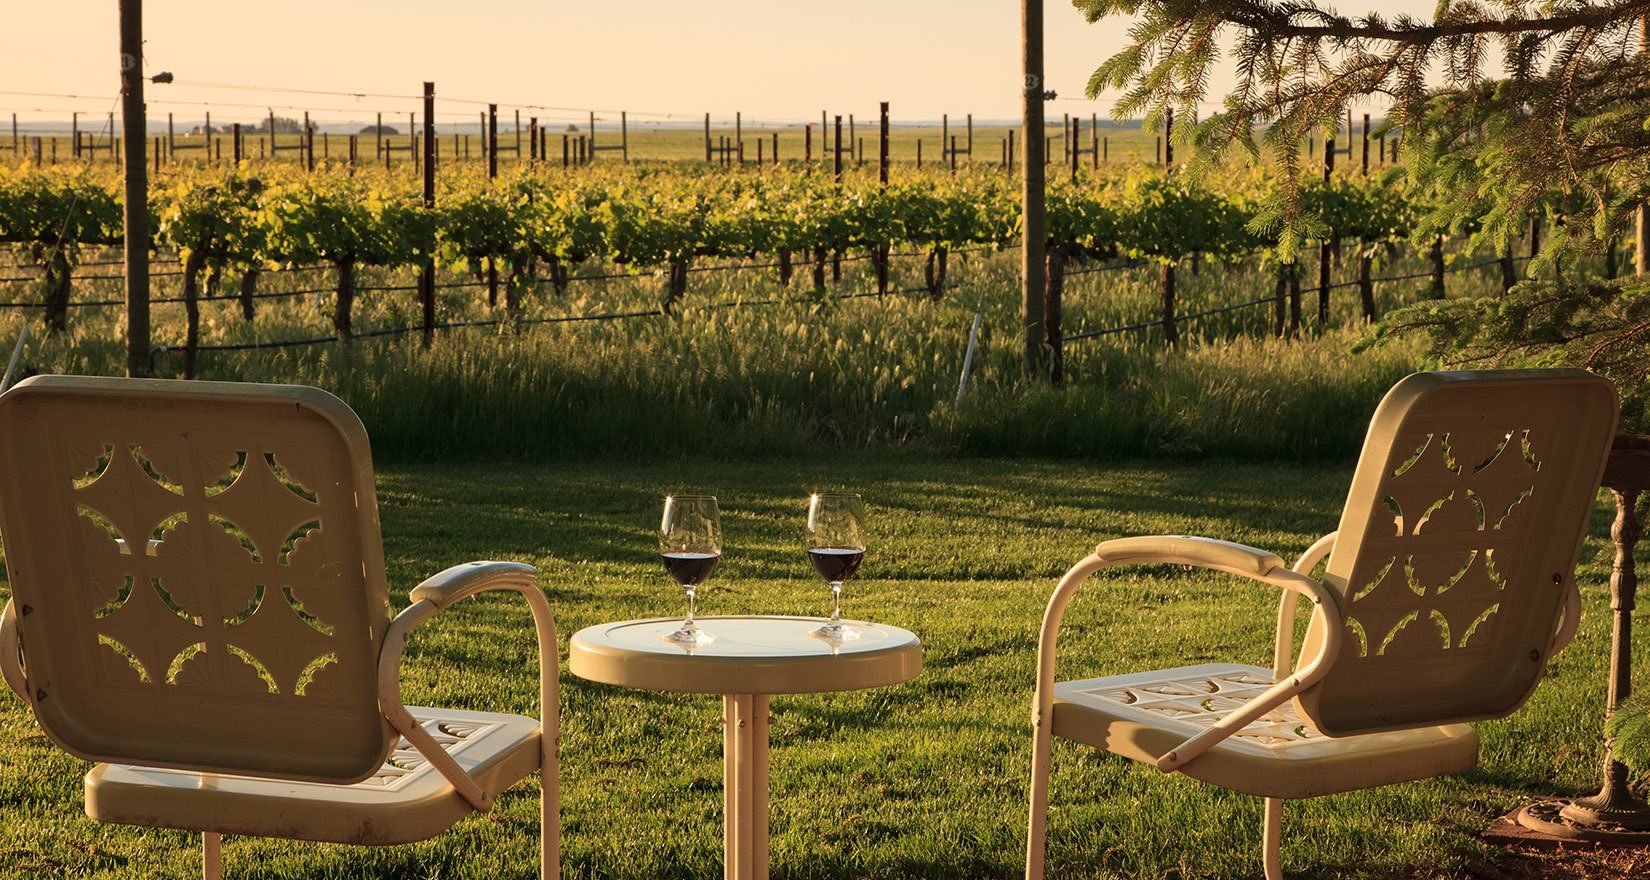 Vineyard with chairs and wine